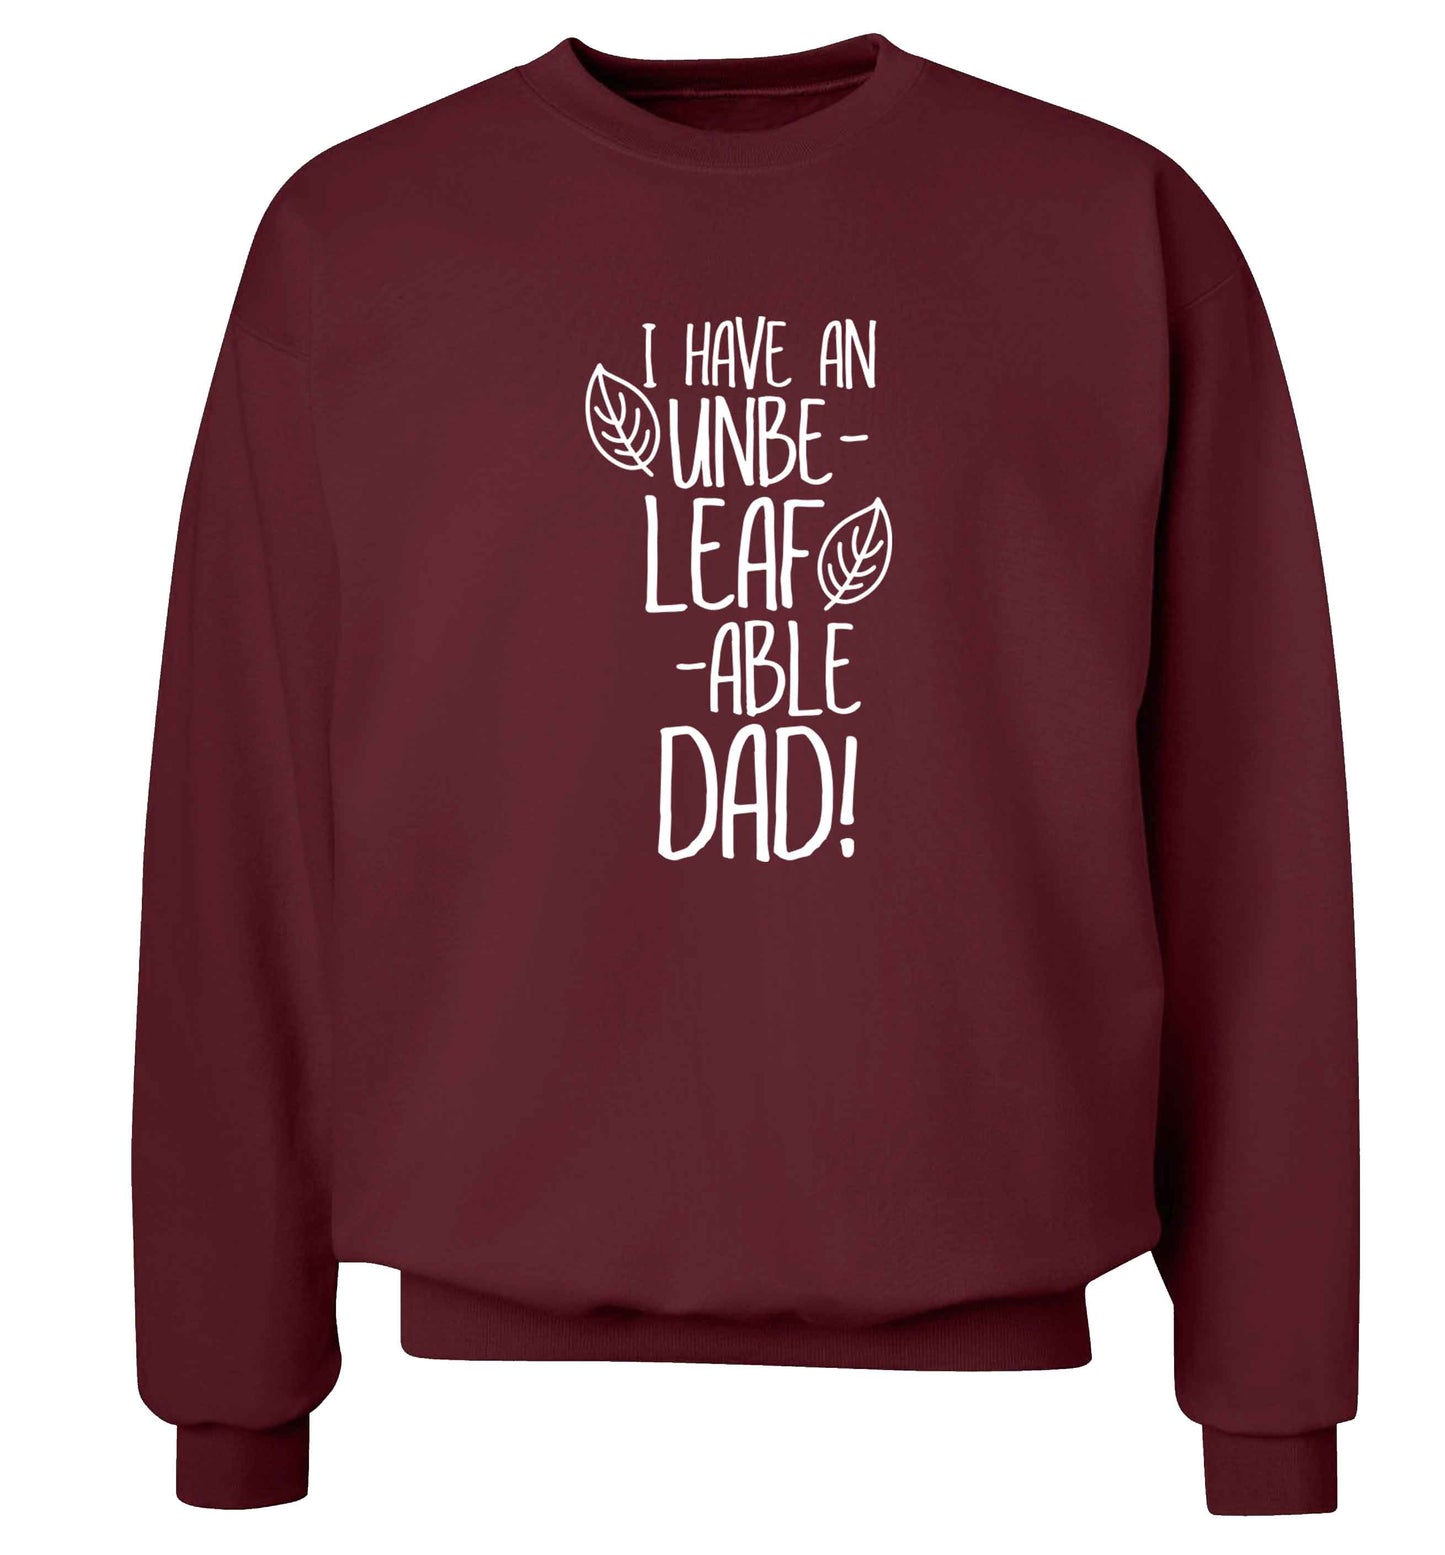 I have an unbe-leaf-able dad Adult's unisex maroon Sweater 2XL